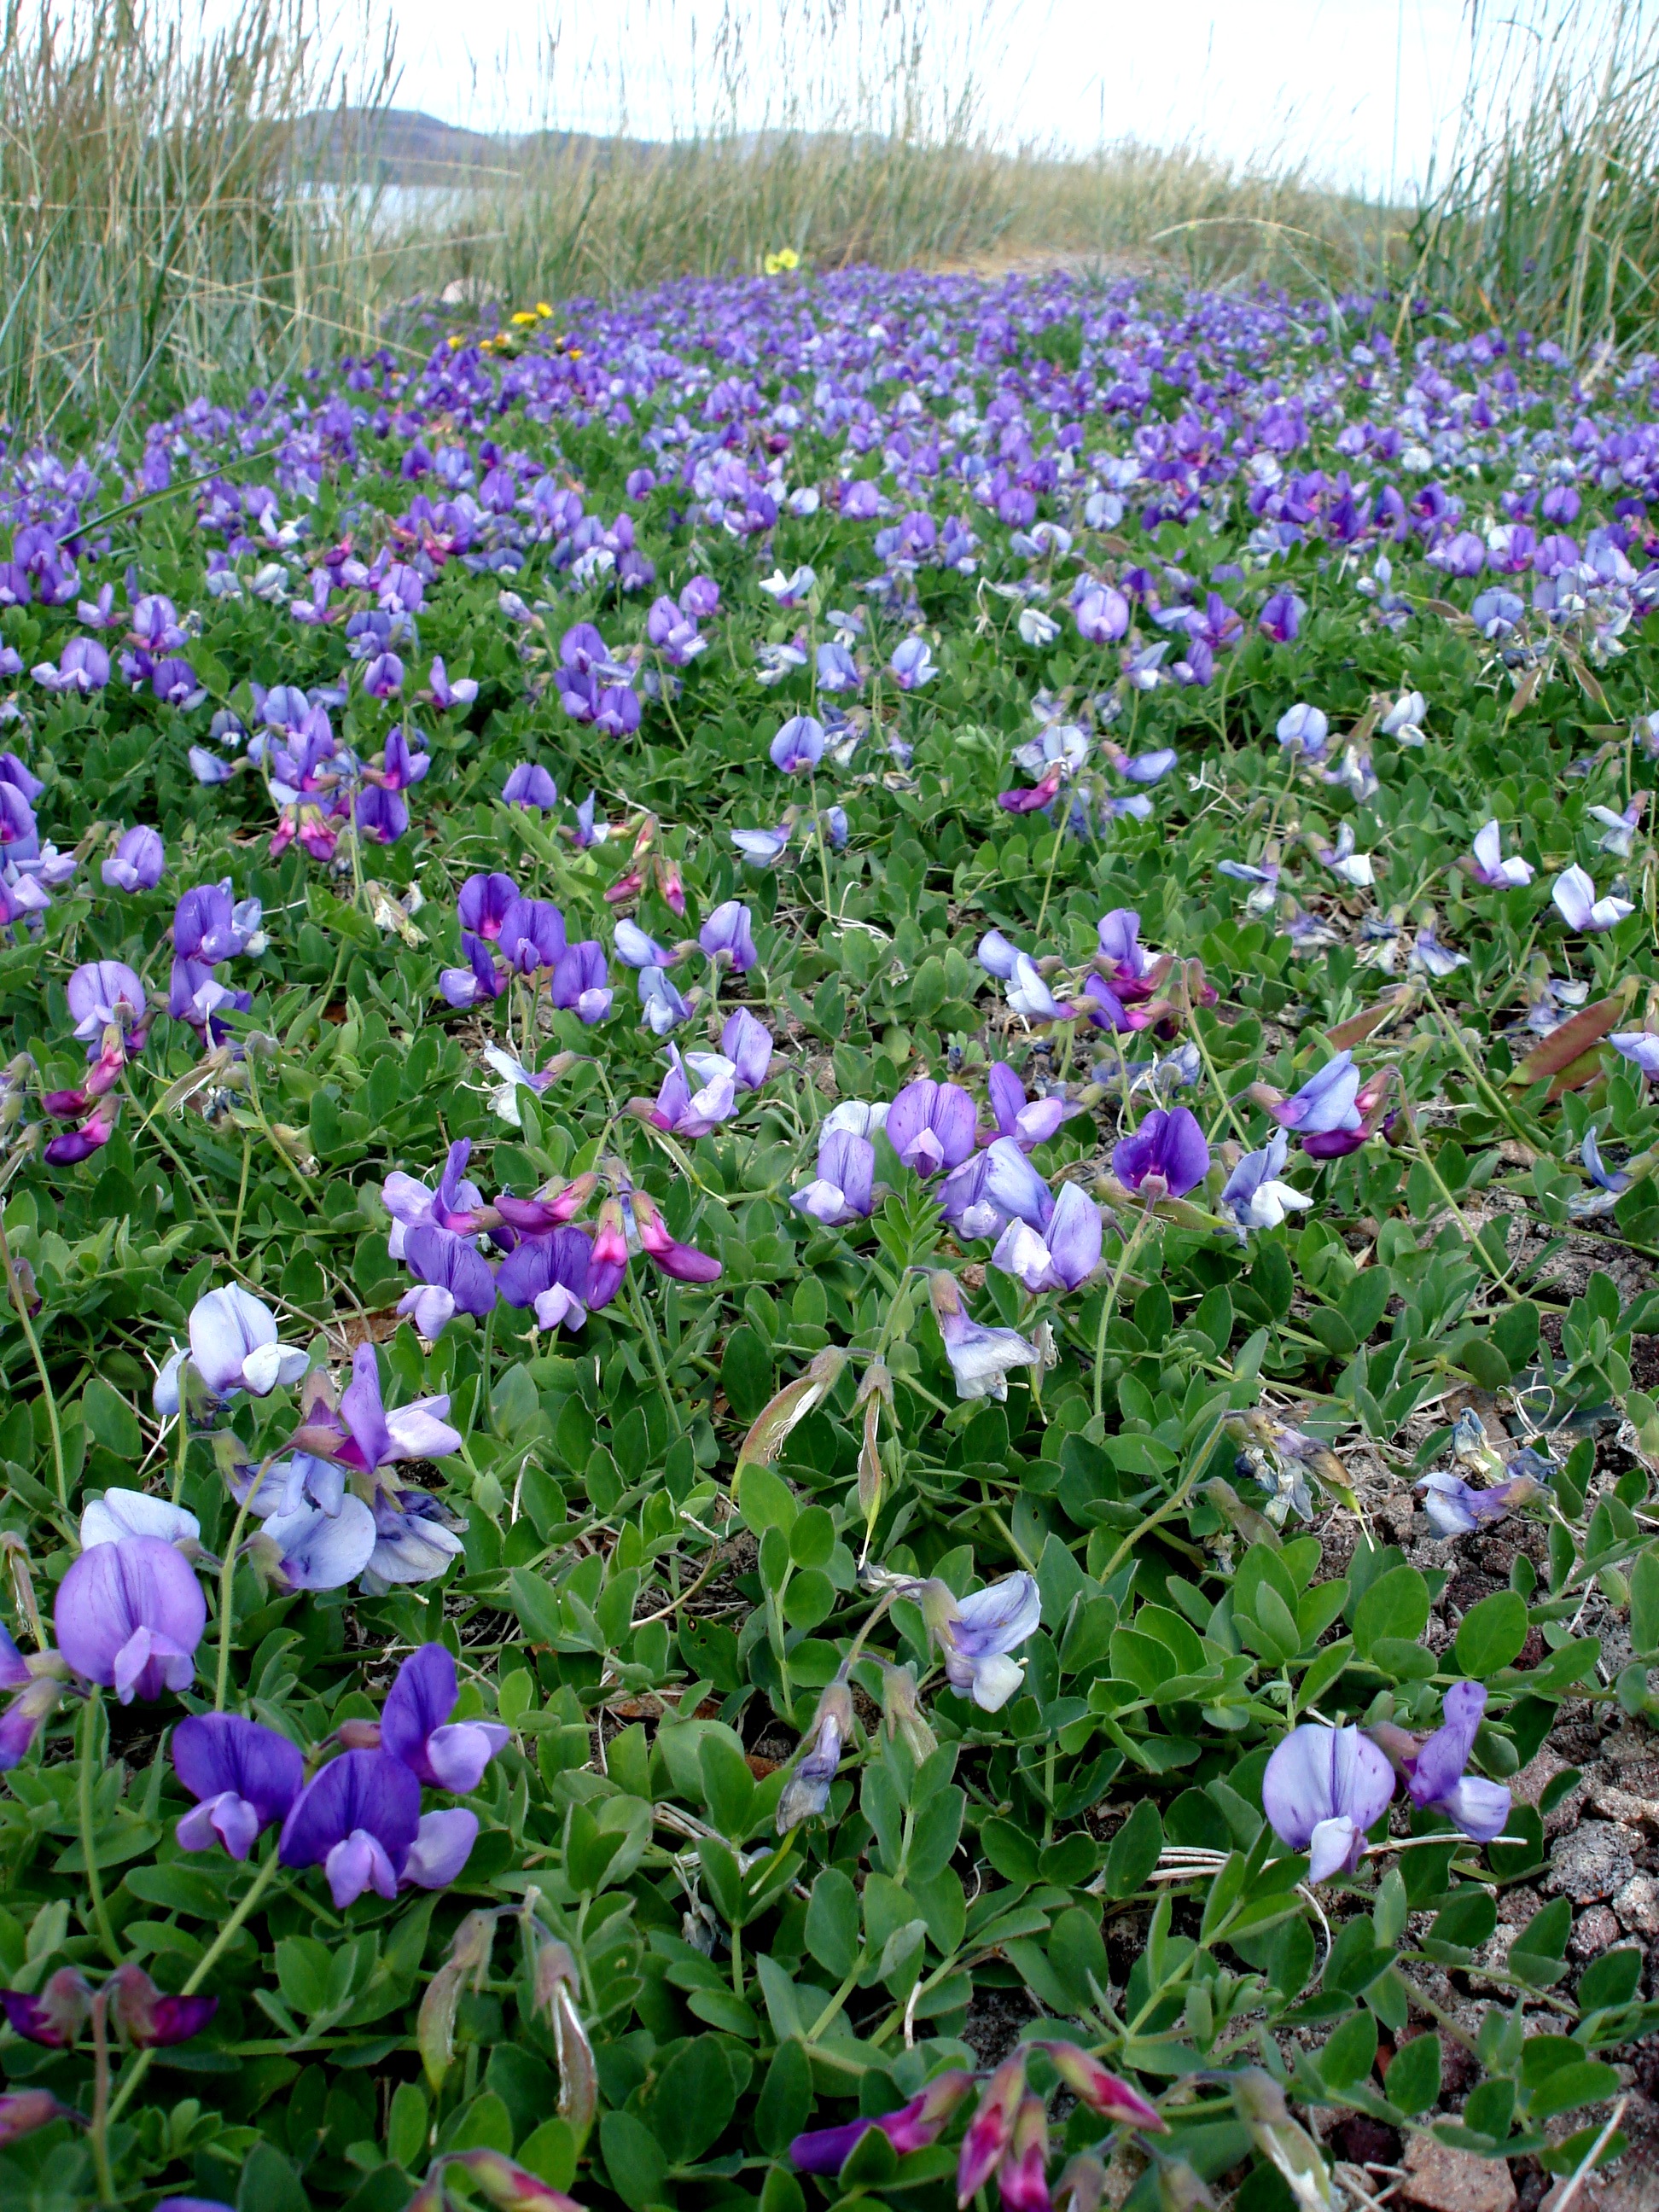 Purple beach peas and other flowers cover land around Bathurst Inlet during the summer. The residents of the two communities of Omingmatok (Bay Chimo) and Kingaok (Bathurst Inlet) now reside in Cambridge Bay and Kugluktuk after the Government of Nunavut determined they were outpost camps, not communities, and would supply only diesel, but not any other services. (PHOTO BY JANE GEORGE) 